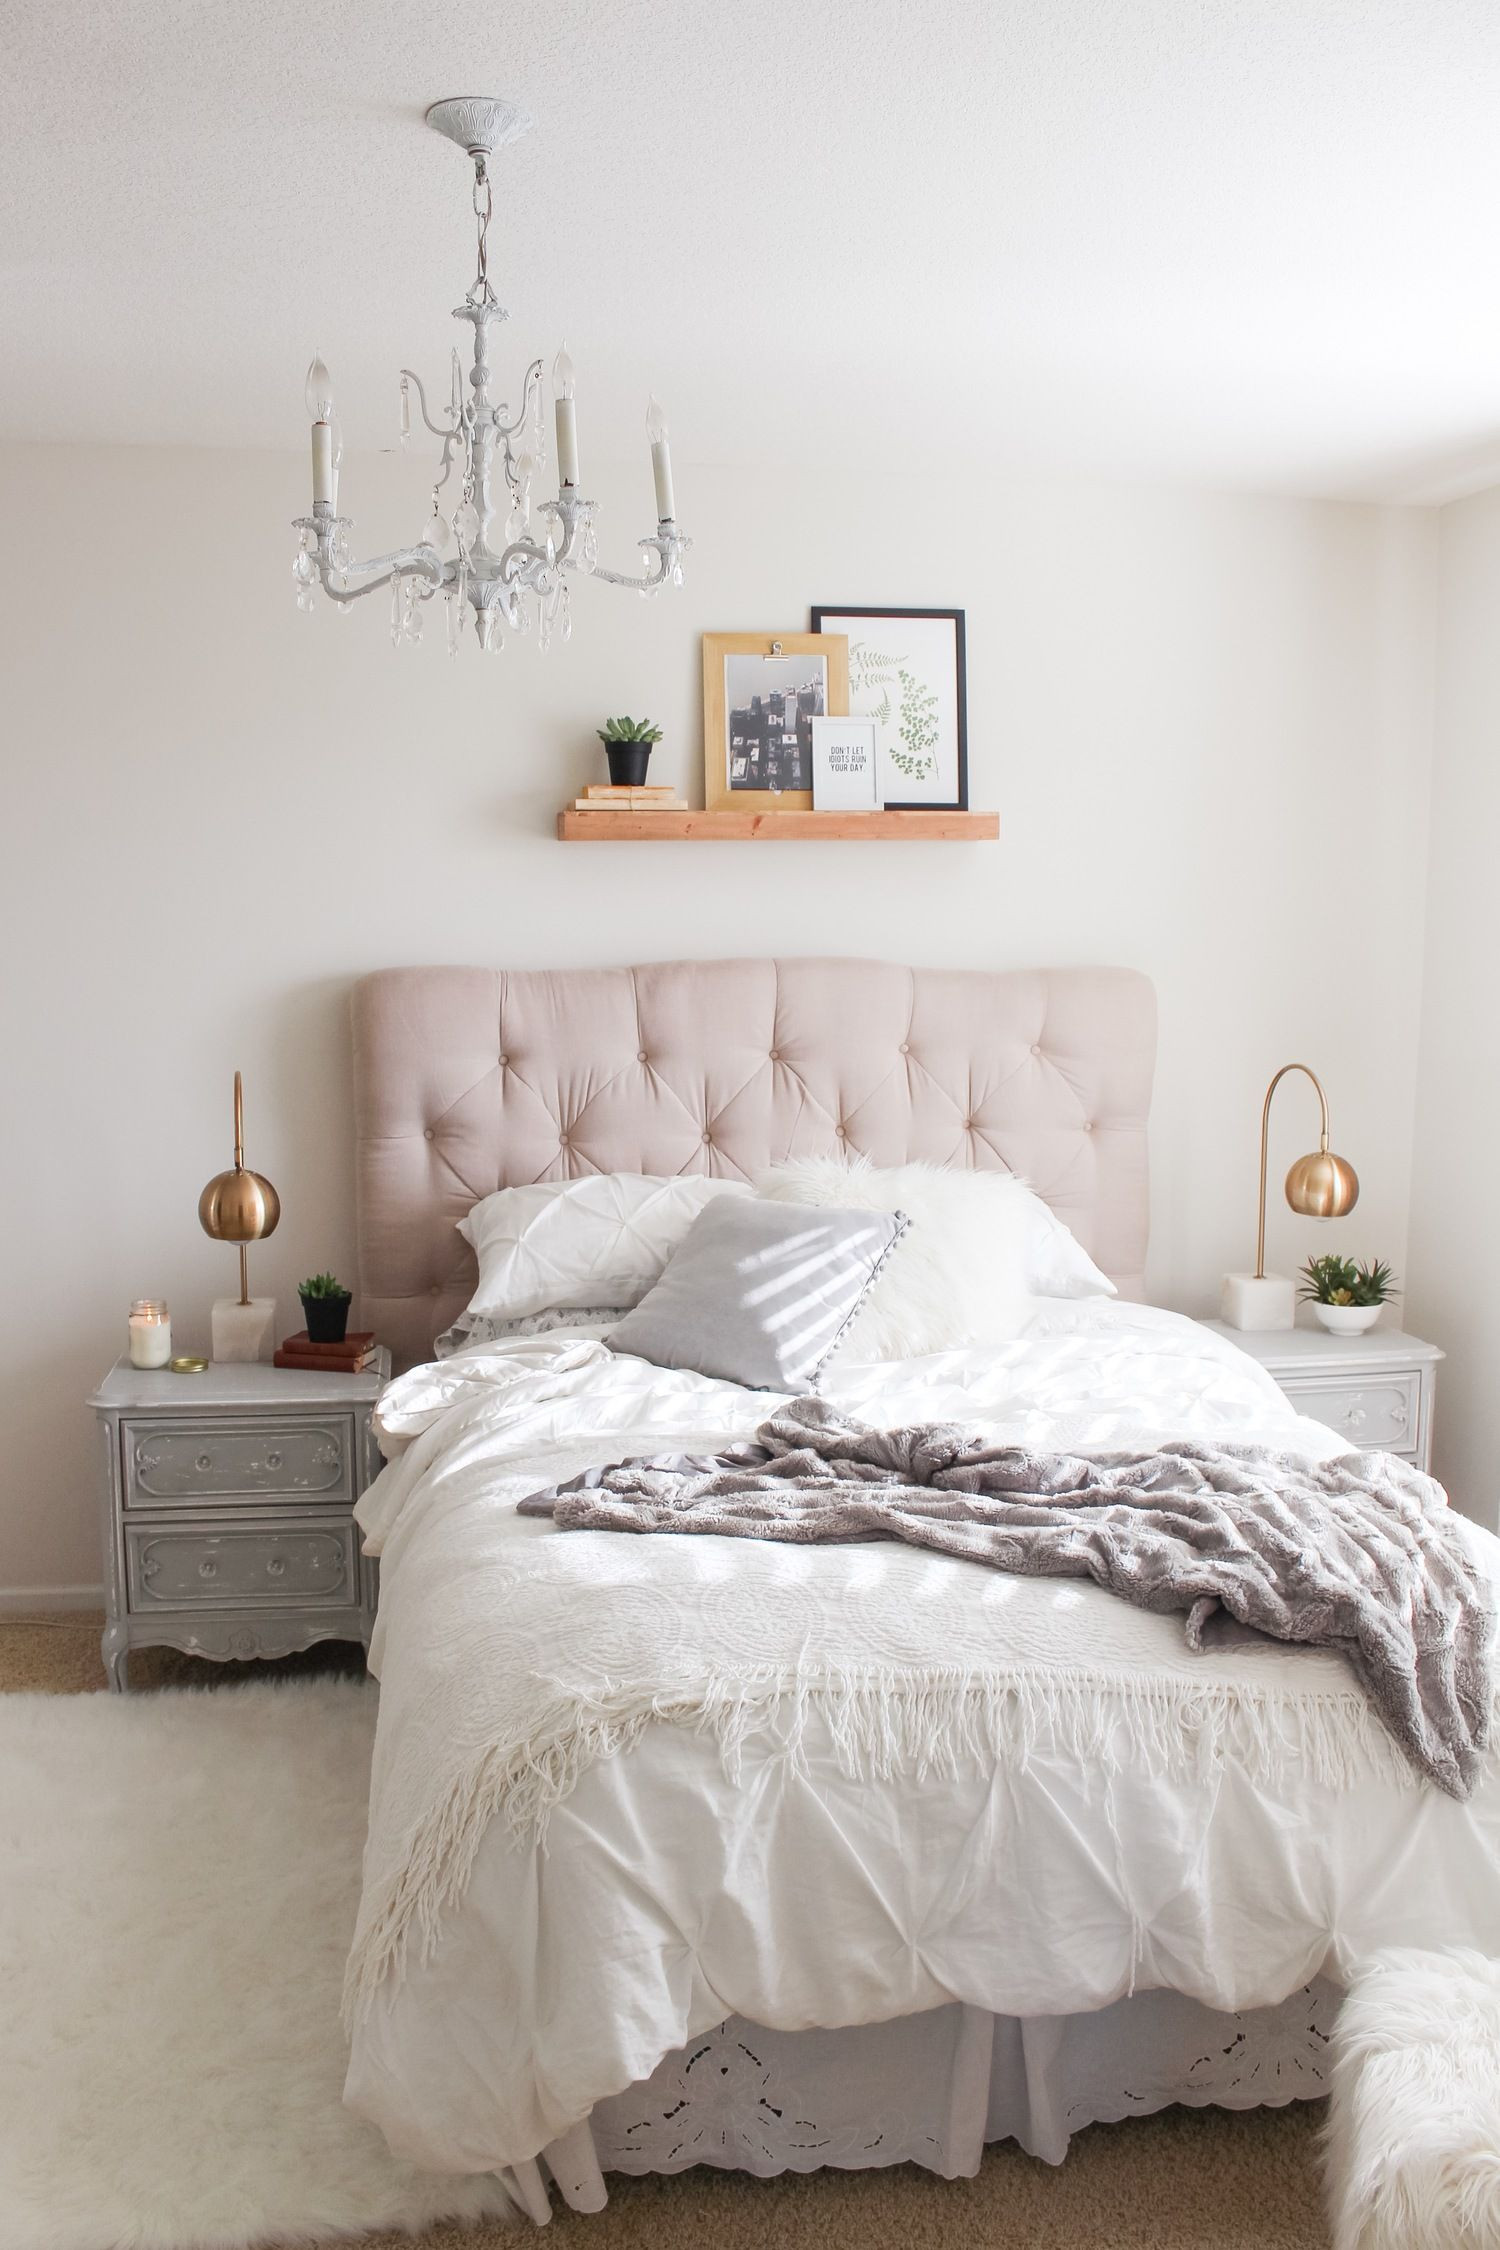 Master Bedroom Key House Party
 From French Shabby Chic to Modern Boho A Bedroom